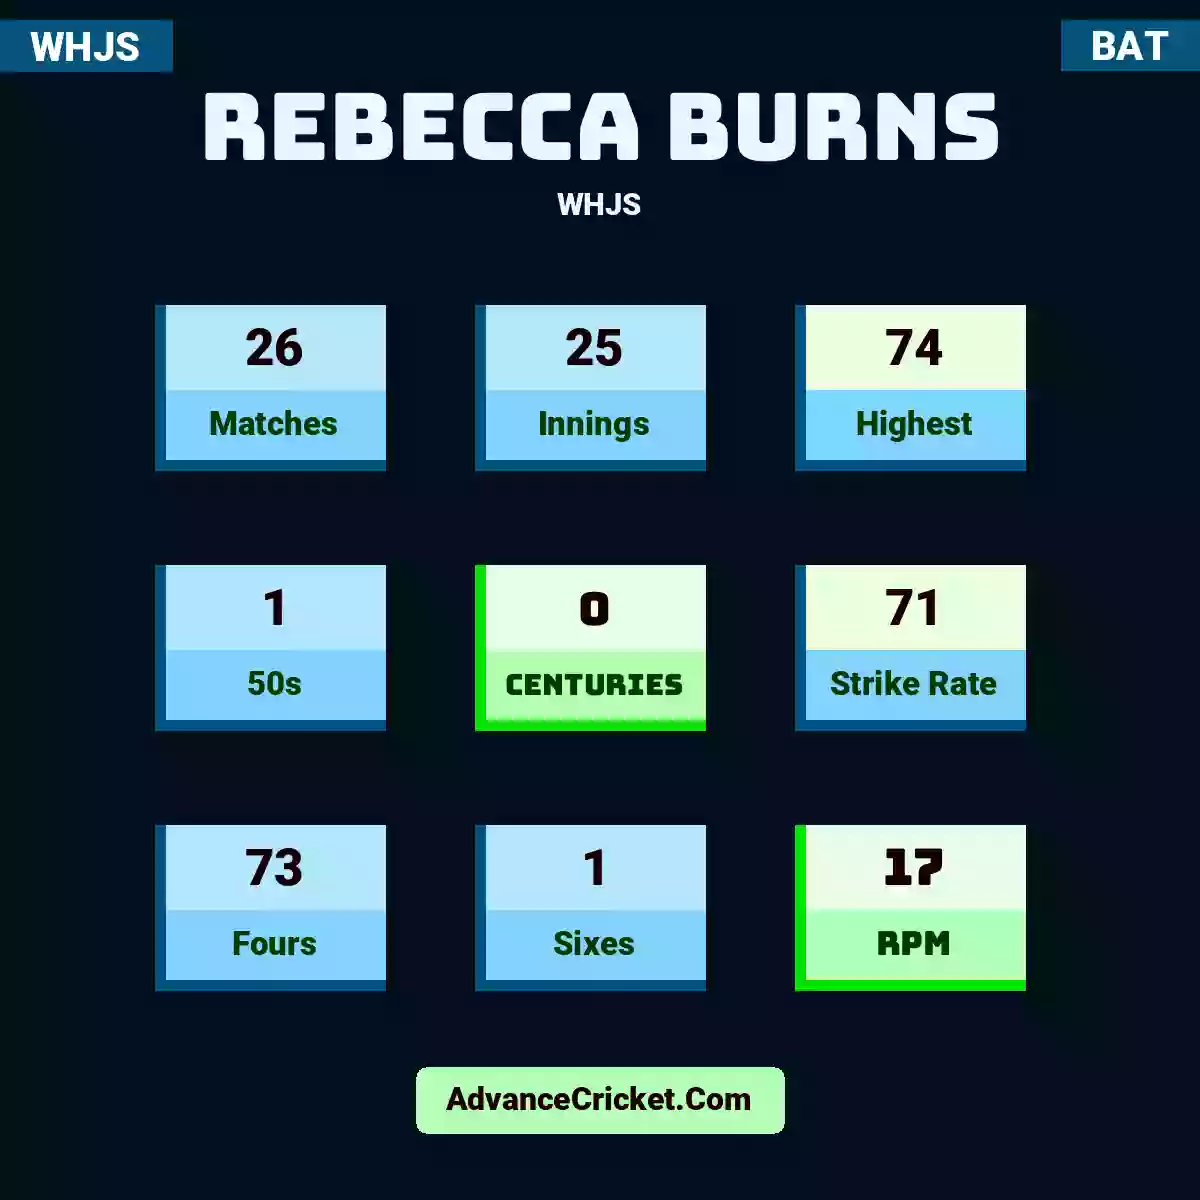 Rebecca Burns WHJS , Rebecca Burns played 26 matches, scored 74 runs as highest, 1 half-centuries, and 0 centuries, with a strike rate of 71. R.Burns hit 73 fours and 1 sixes, with an RPM of 17.